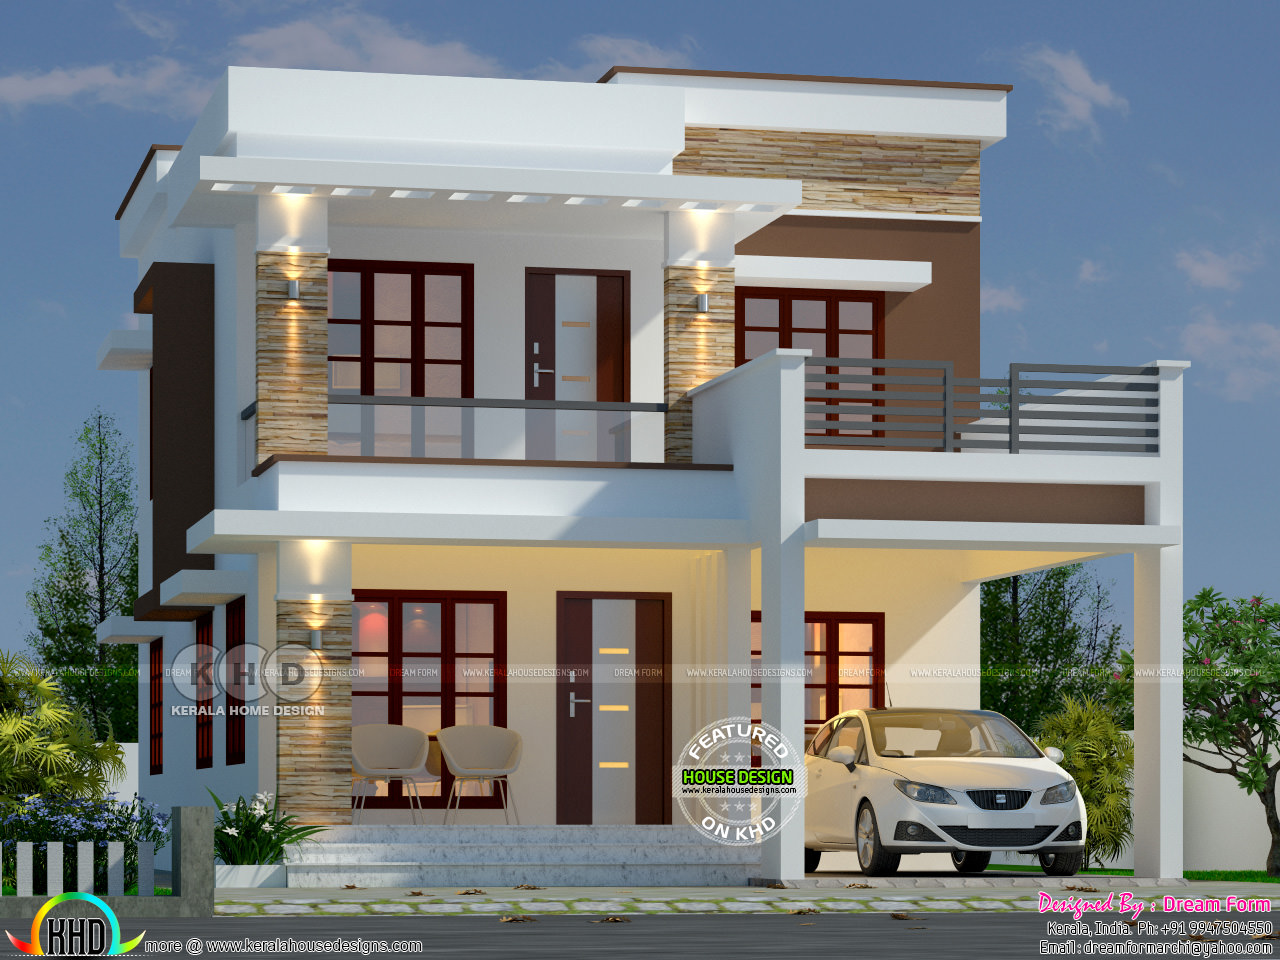 1656 Sq Ft 3 Bedroom Flat Roof Home Kerala Home Design And